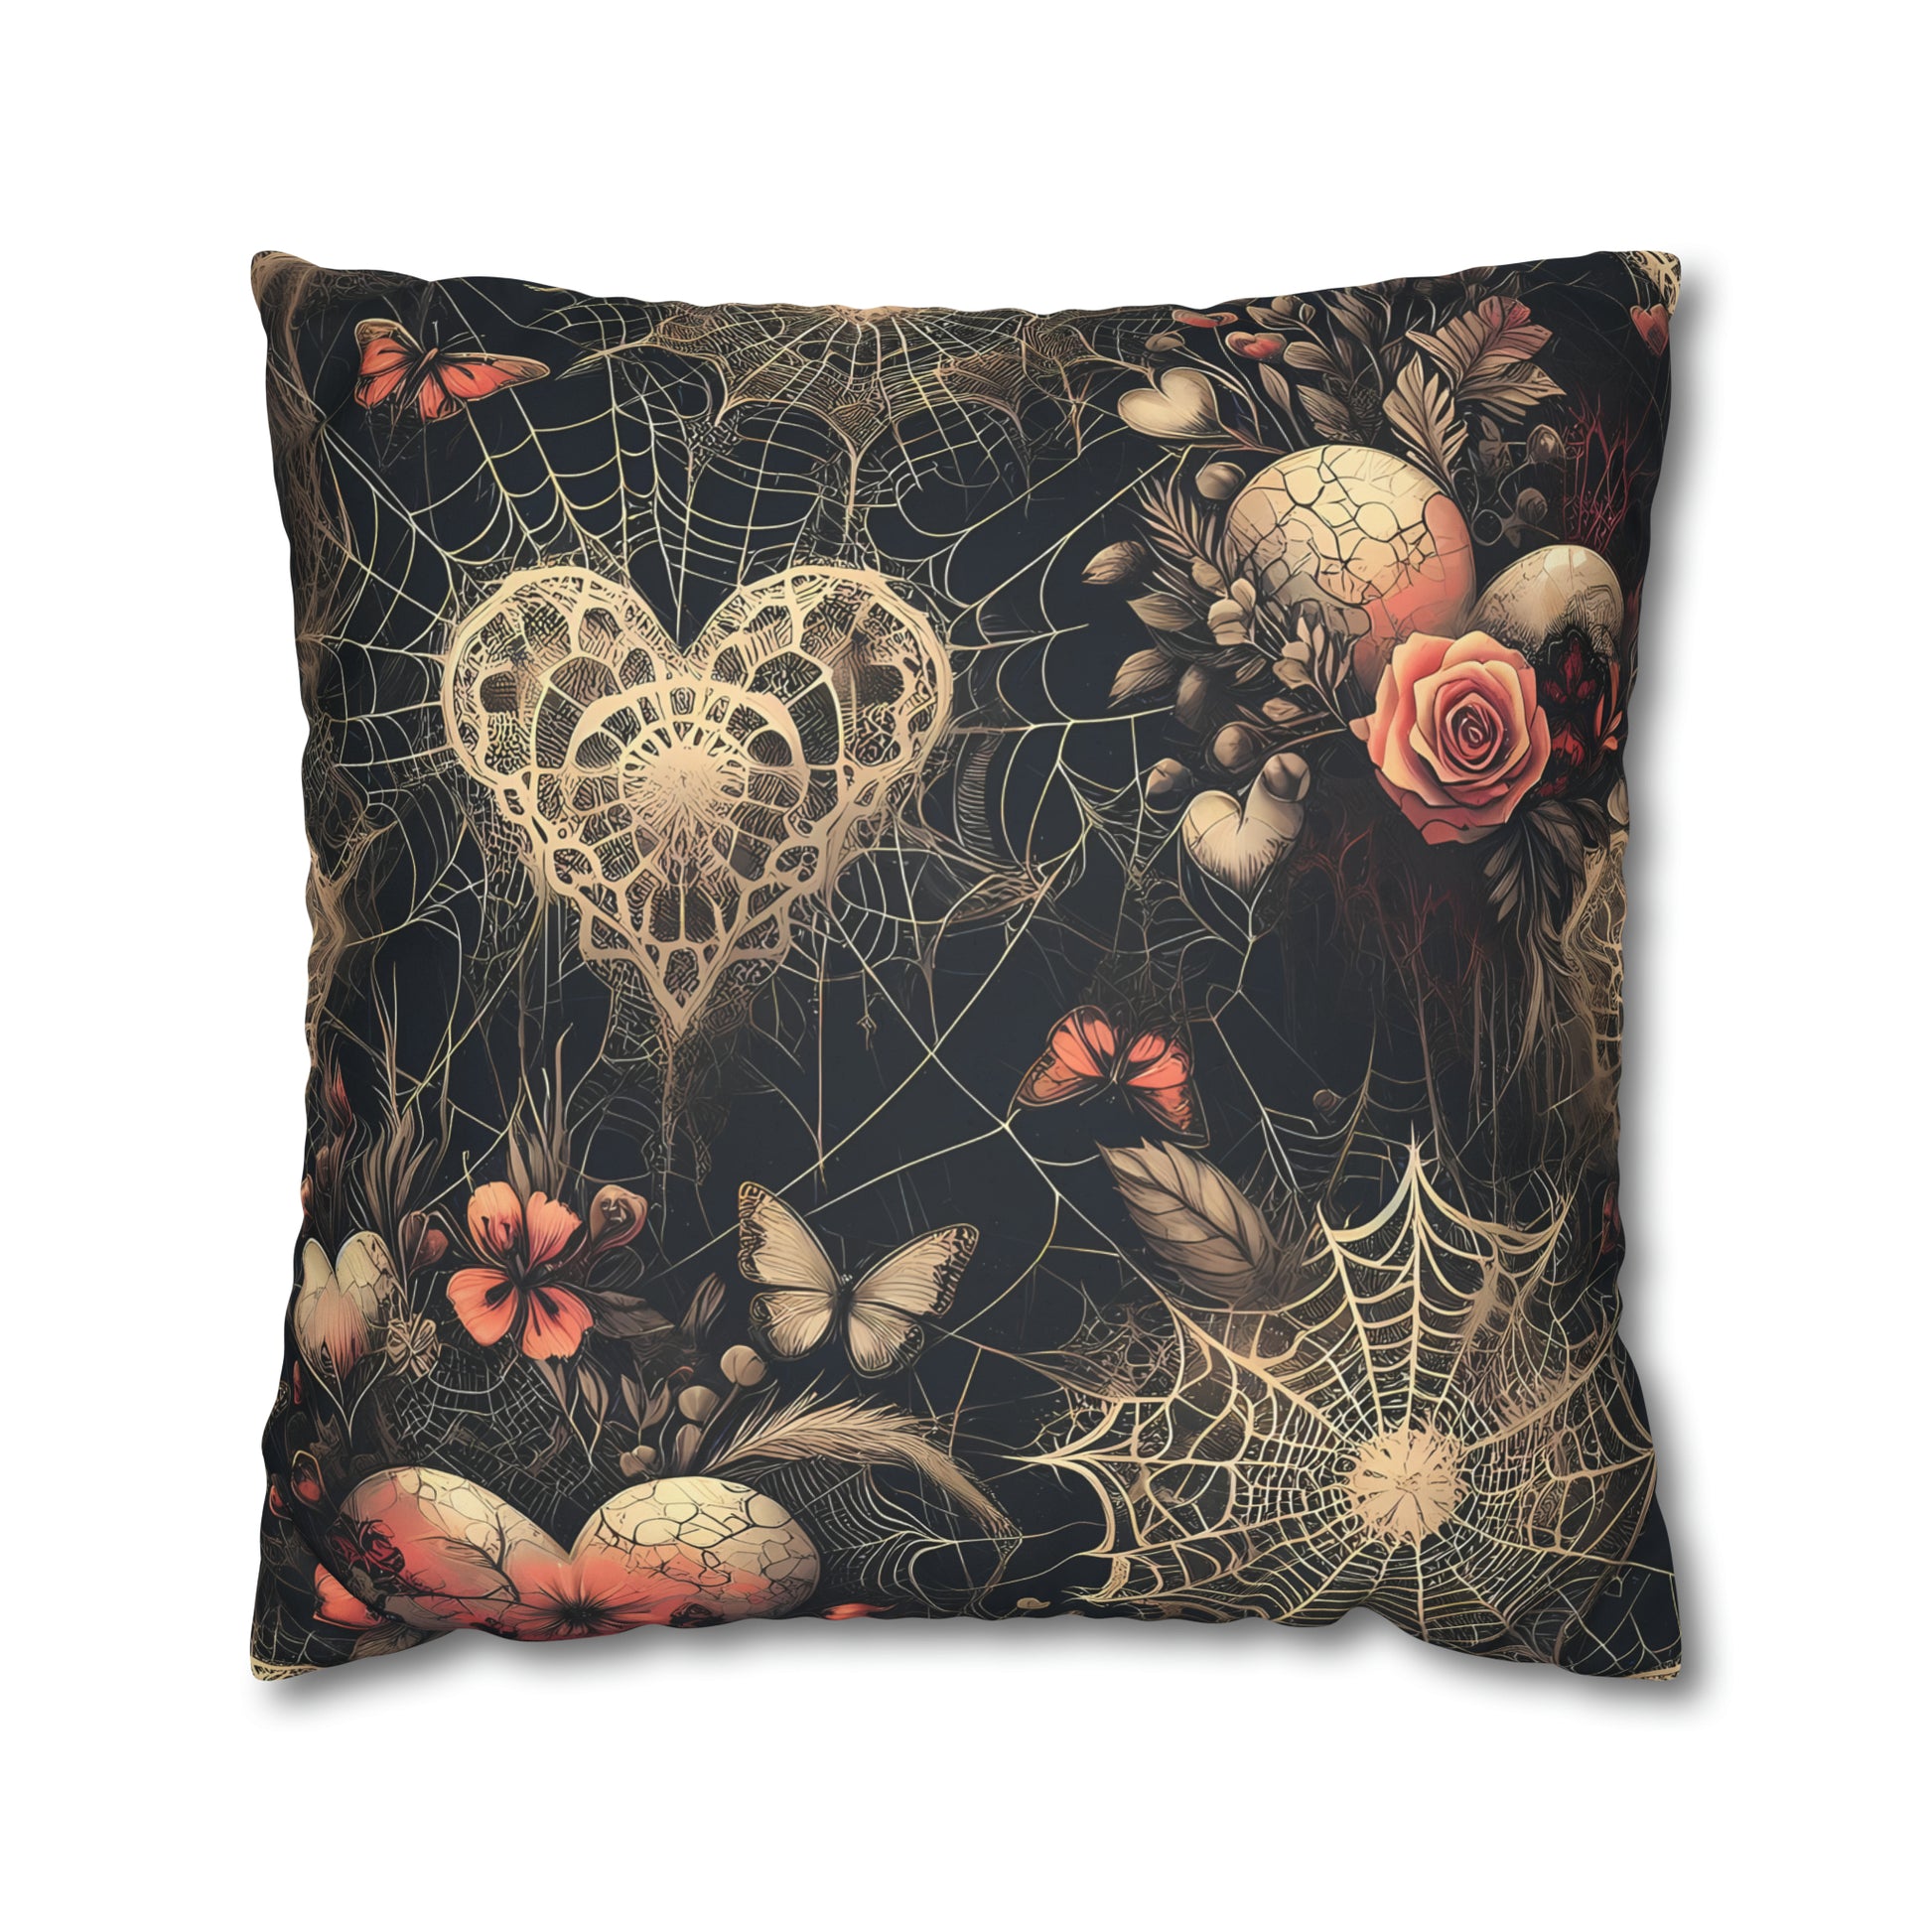 Spiderweb Hearts and Roses Faux Suede Square Pillow CaseHome DecorVTZdesigns20" × 20"All Over PrintAOPBed